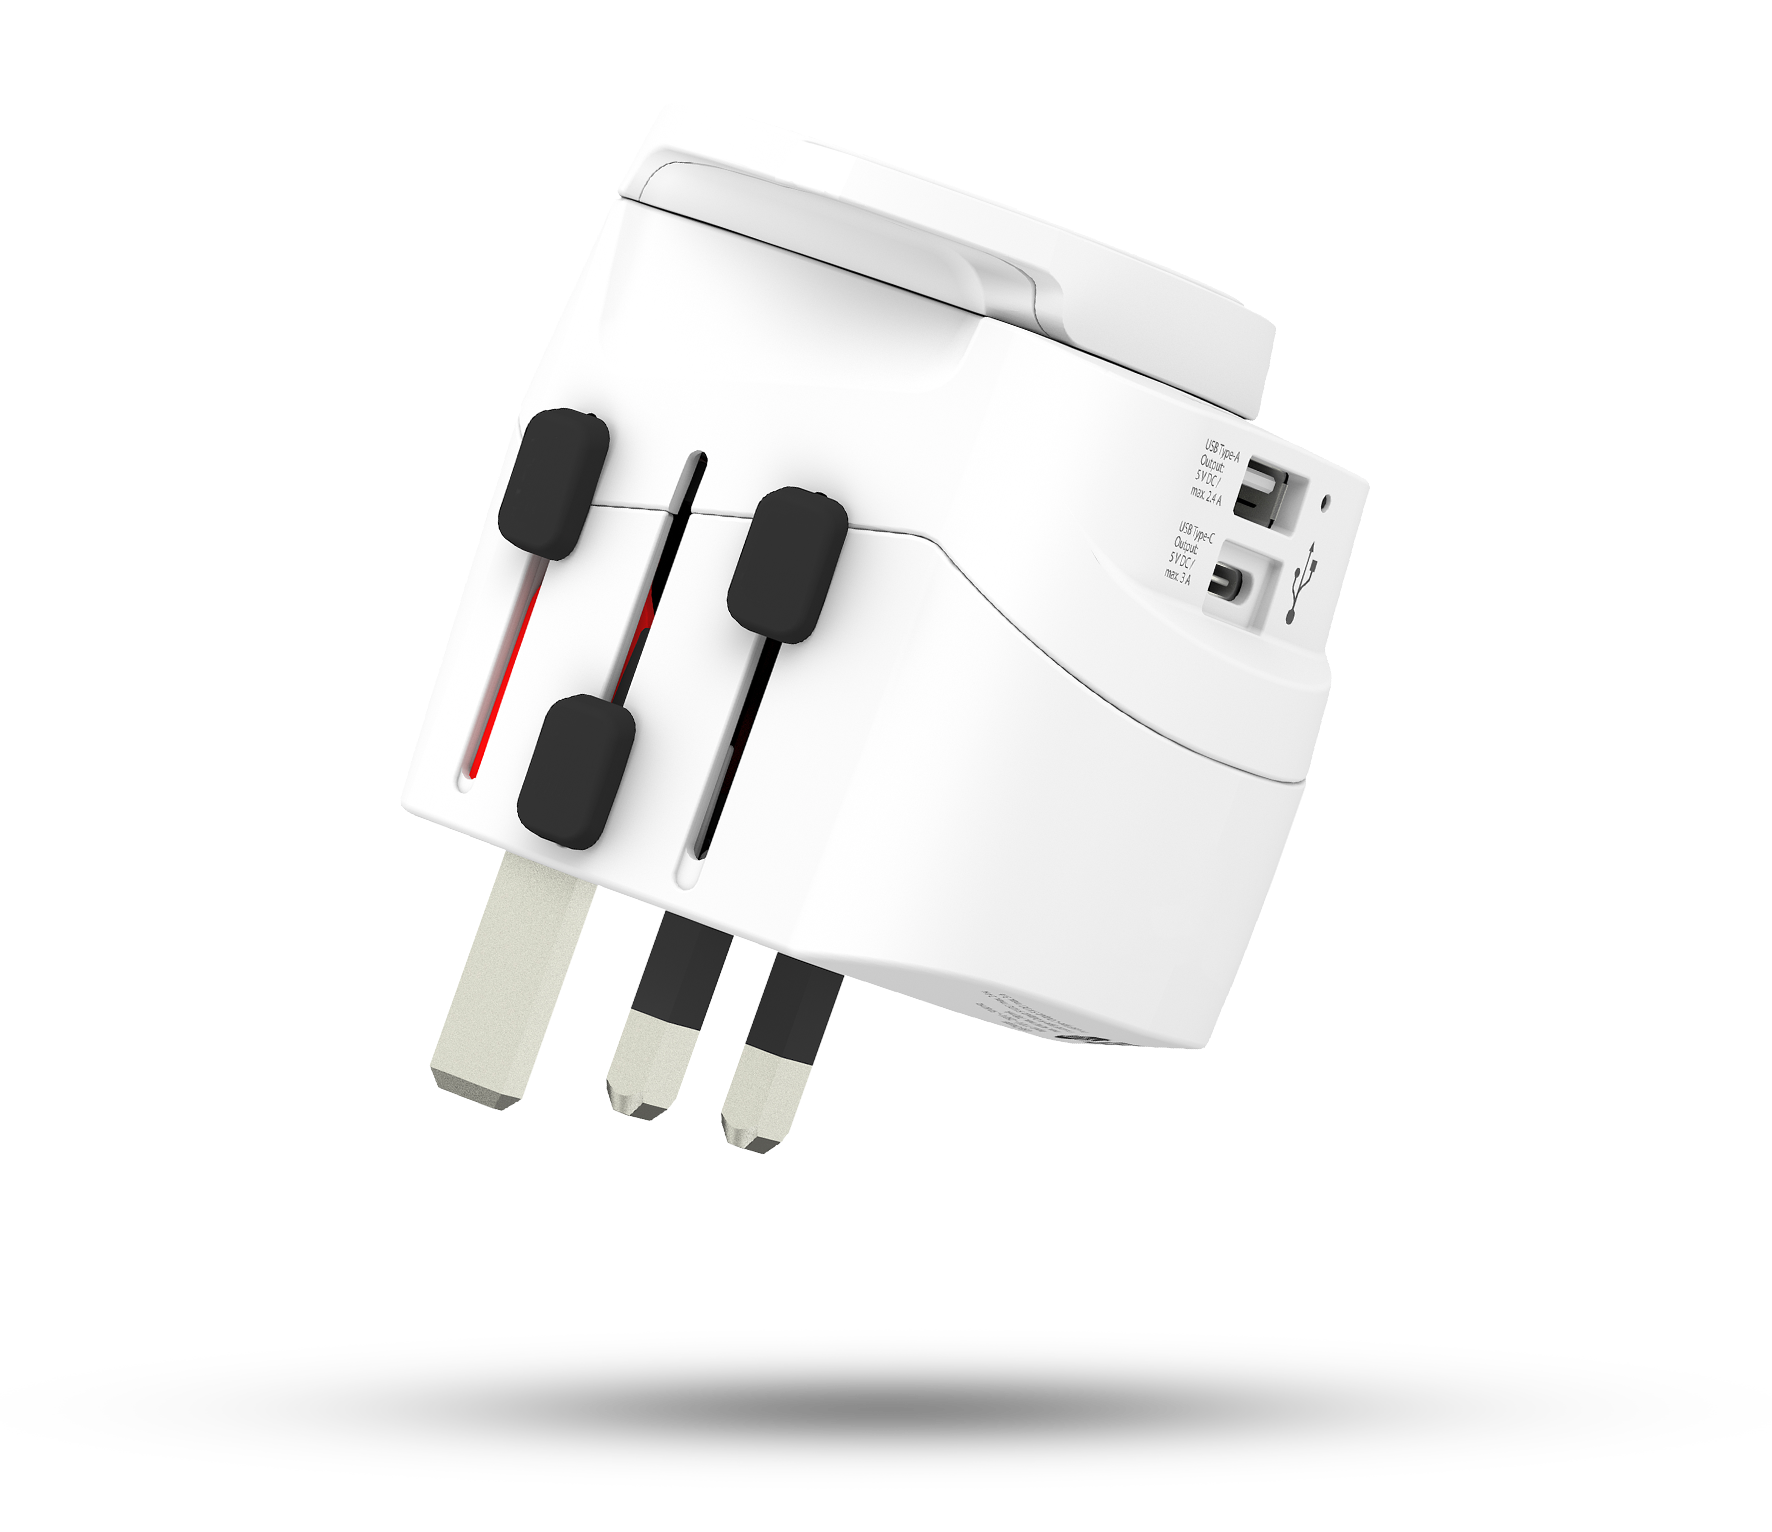 Skross PRO Light USB AC30PD - World Promotional 3-pole earthed travel adapter with power delivery SKR-0265